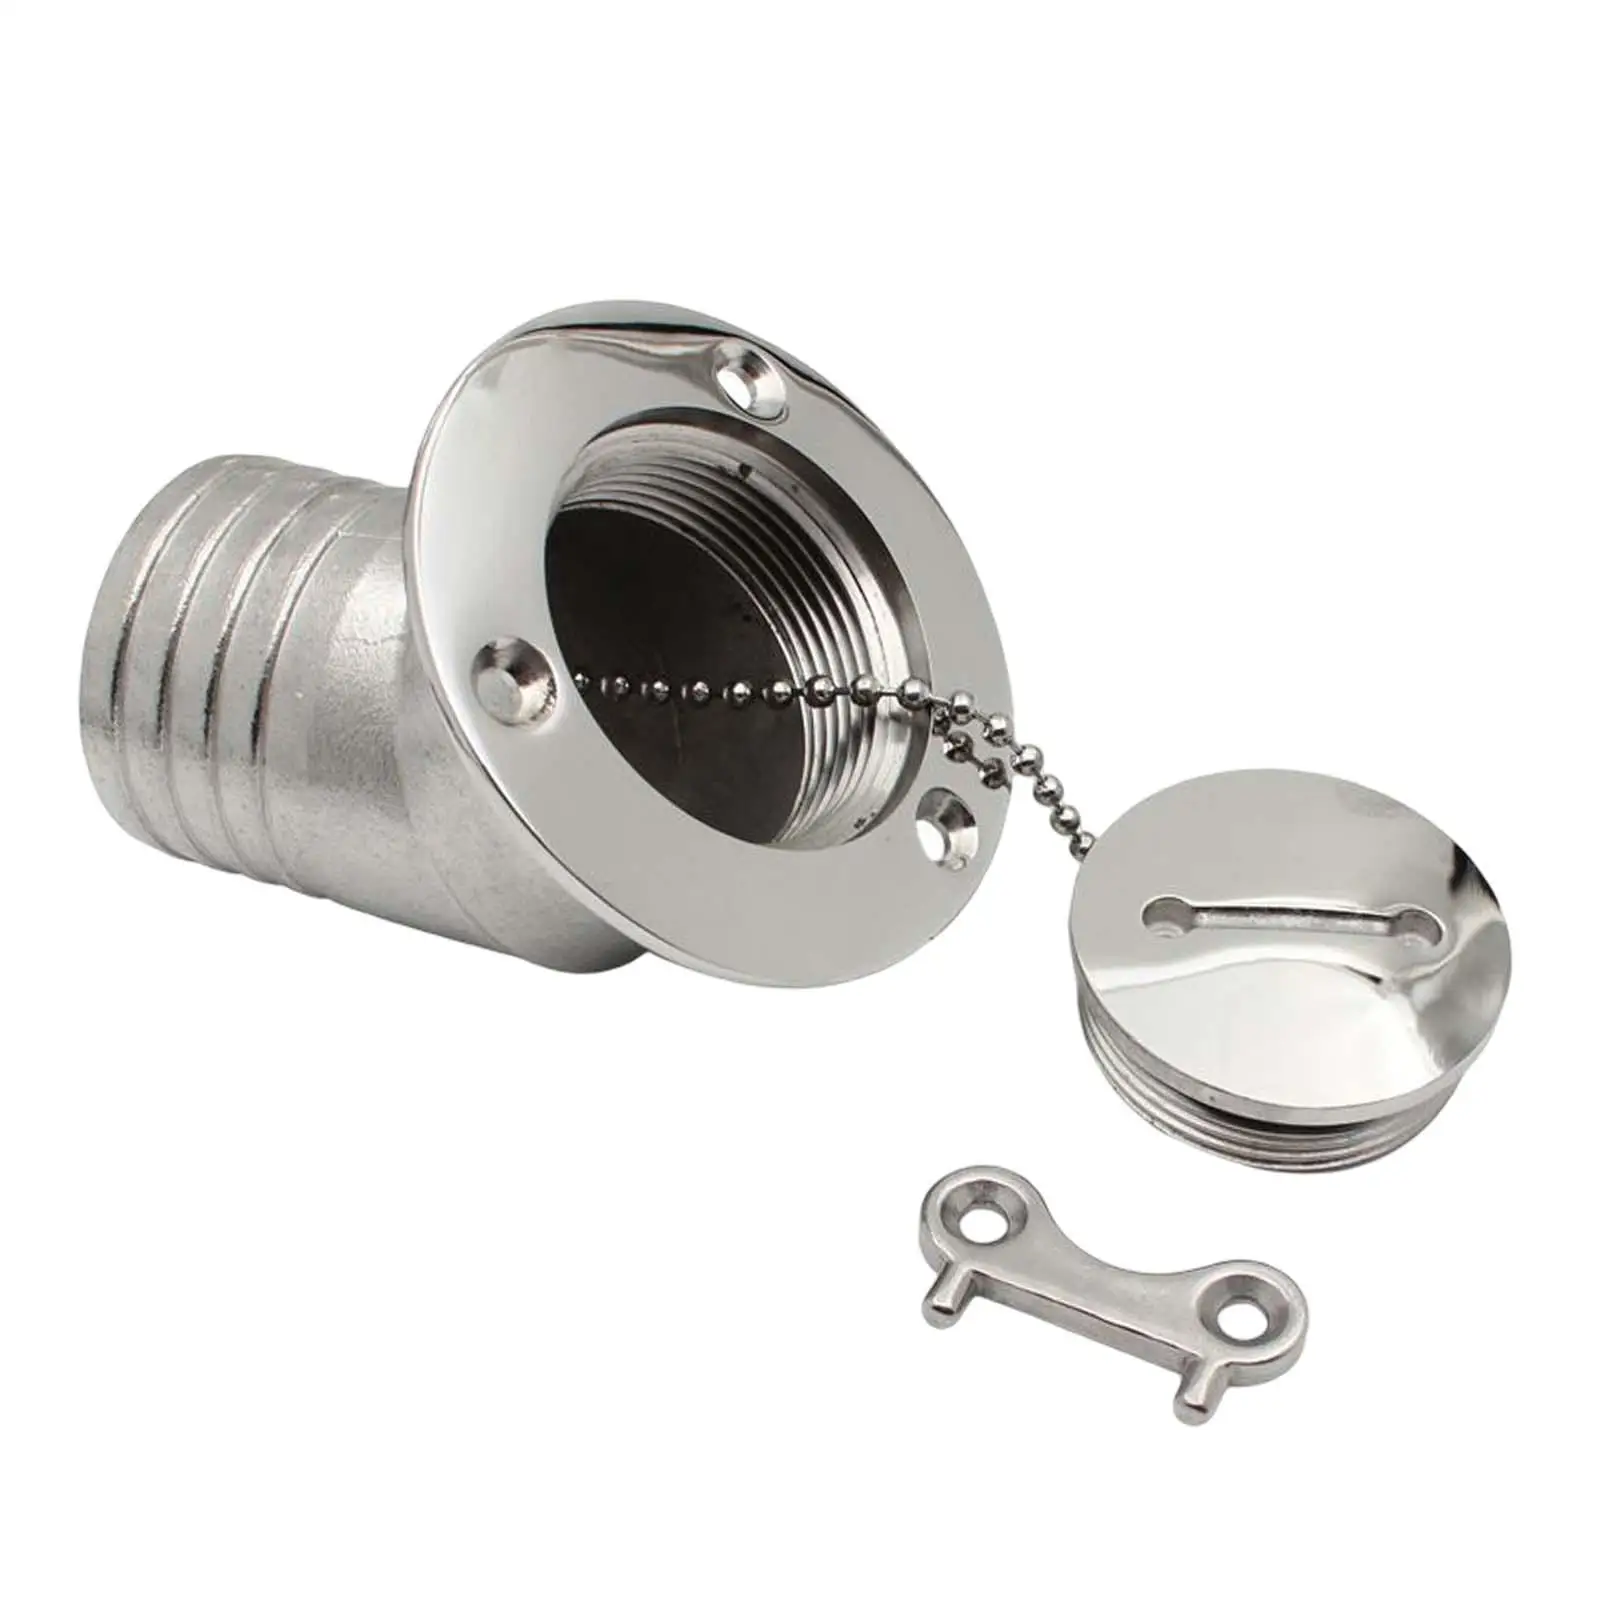 Boat Deck Fill Filler Marine Hardware Universal 316 Stainless Steel Gas Water Deck Fill for Boat Yacht Replacement